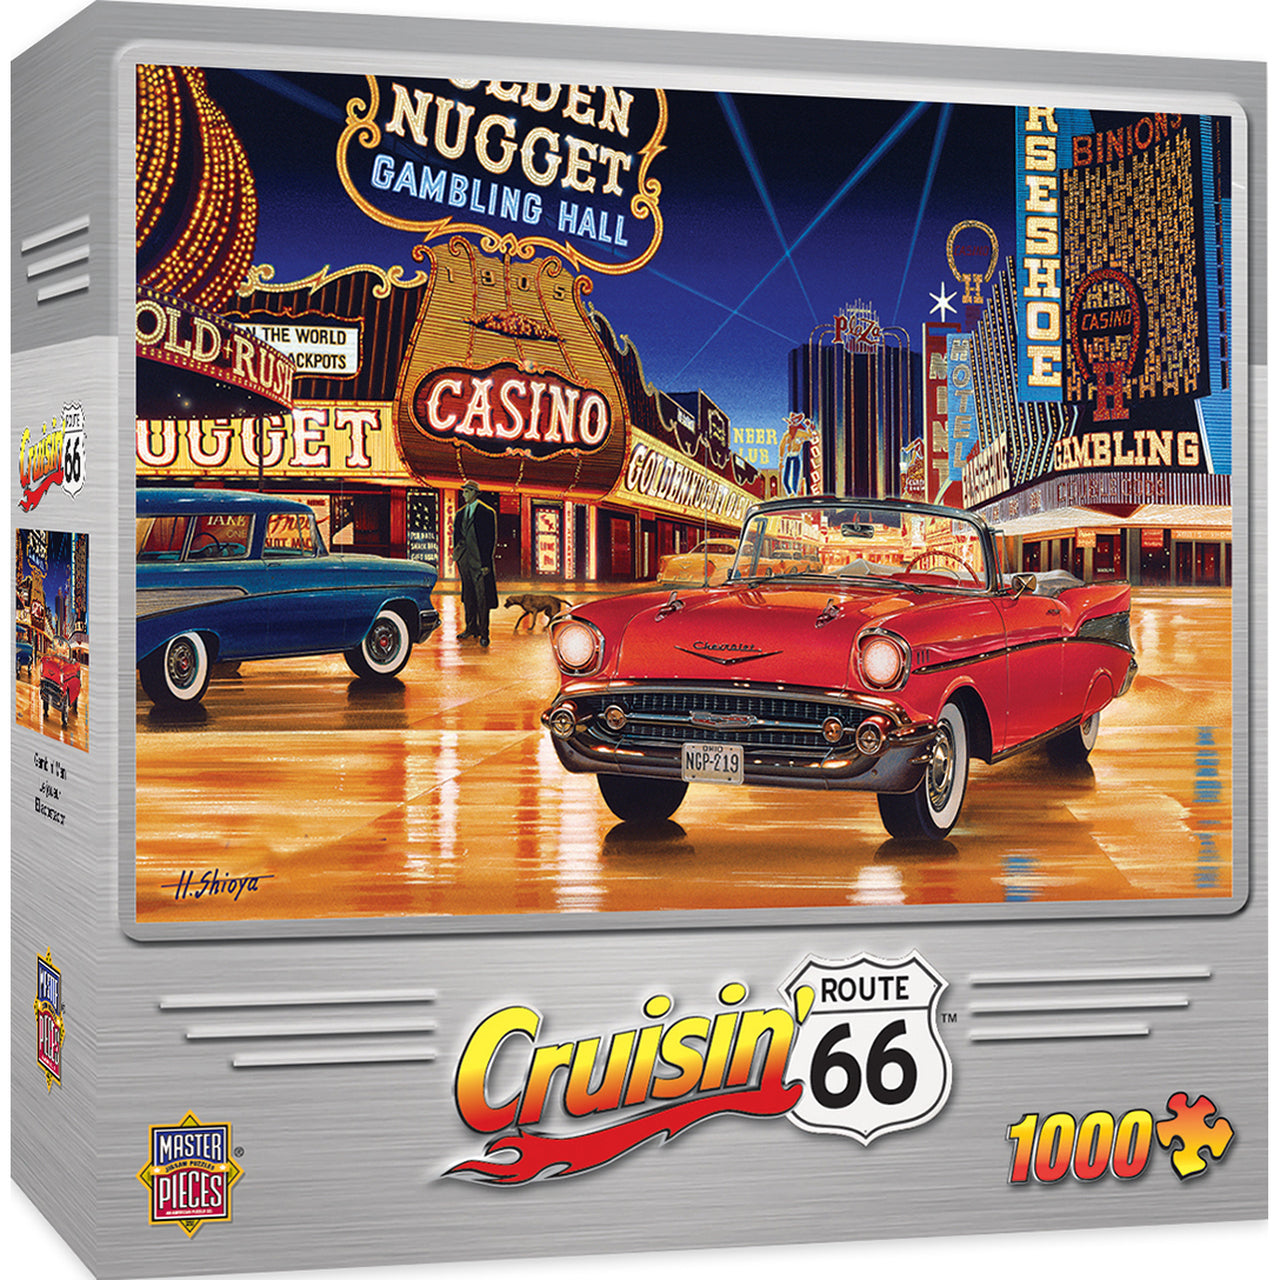 Cruisin' Route 66 - Gamblin' Man 1000 Piece Jigsaw Puzzle by Masterpieces